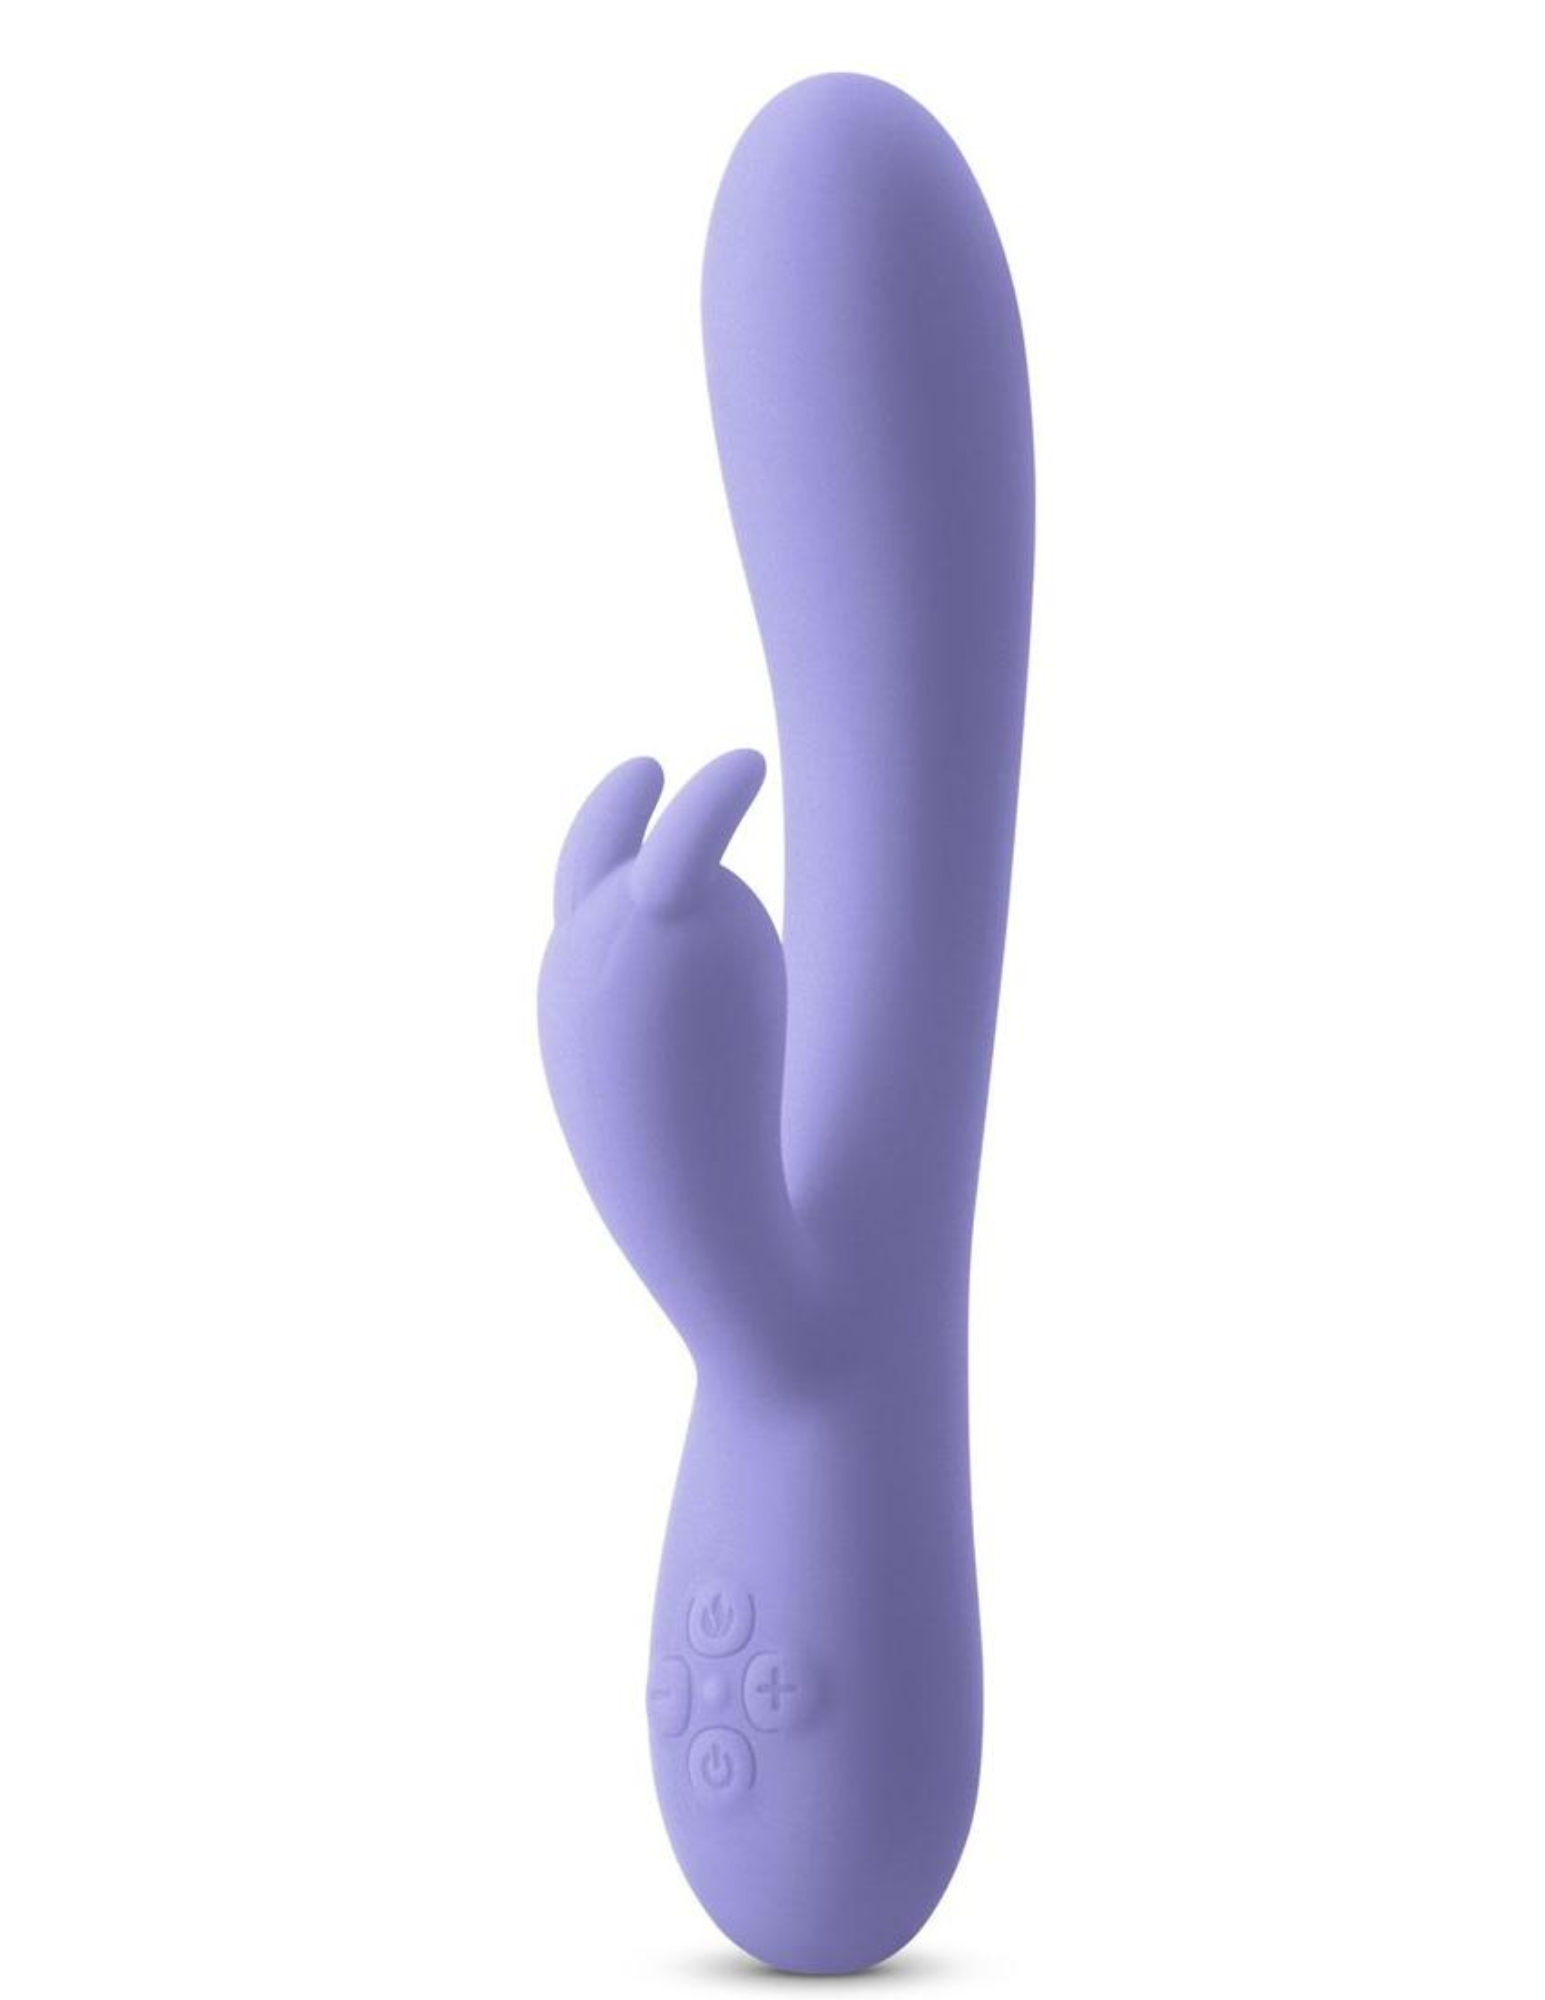 Photo of the Inya Luv Bunny (purple) from NS Novelties shows off its power and control buttons, as well as kits bunny shaped clit stimulator.